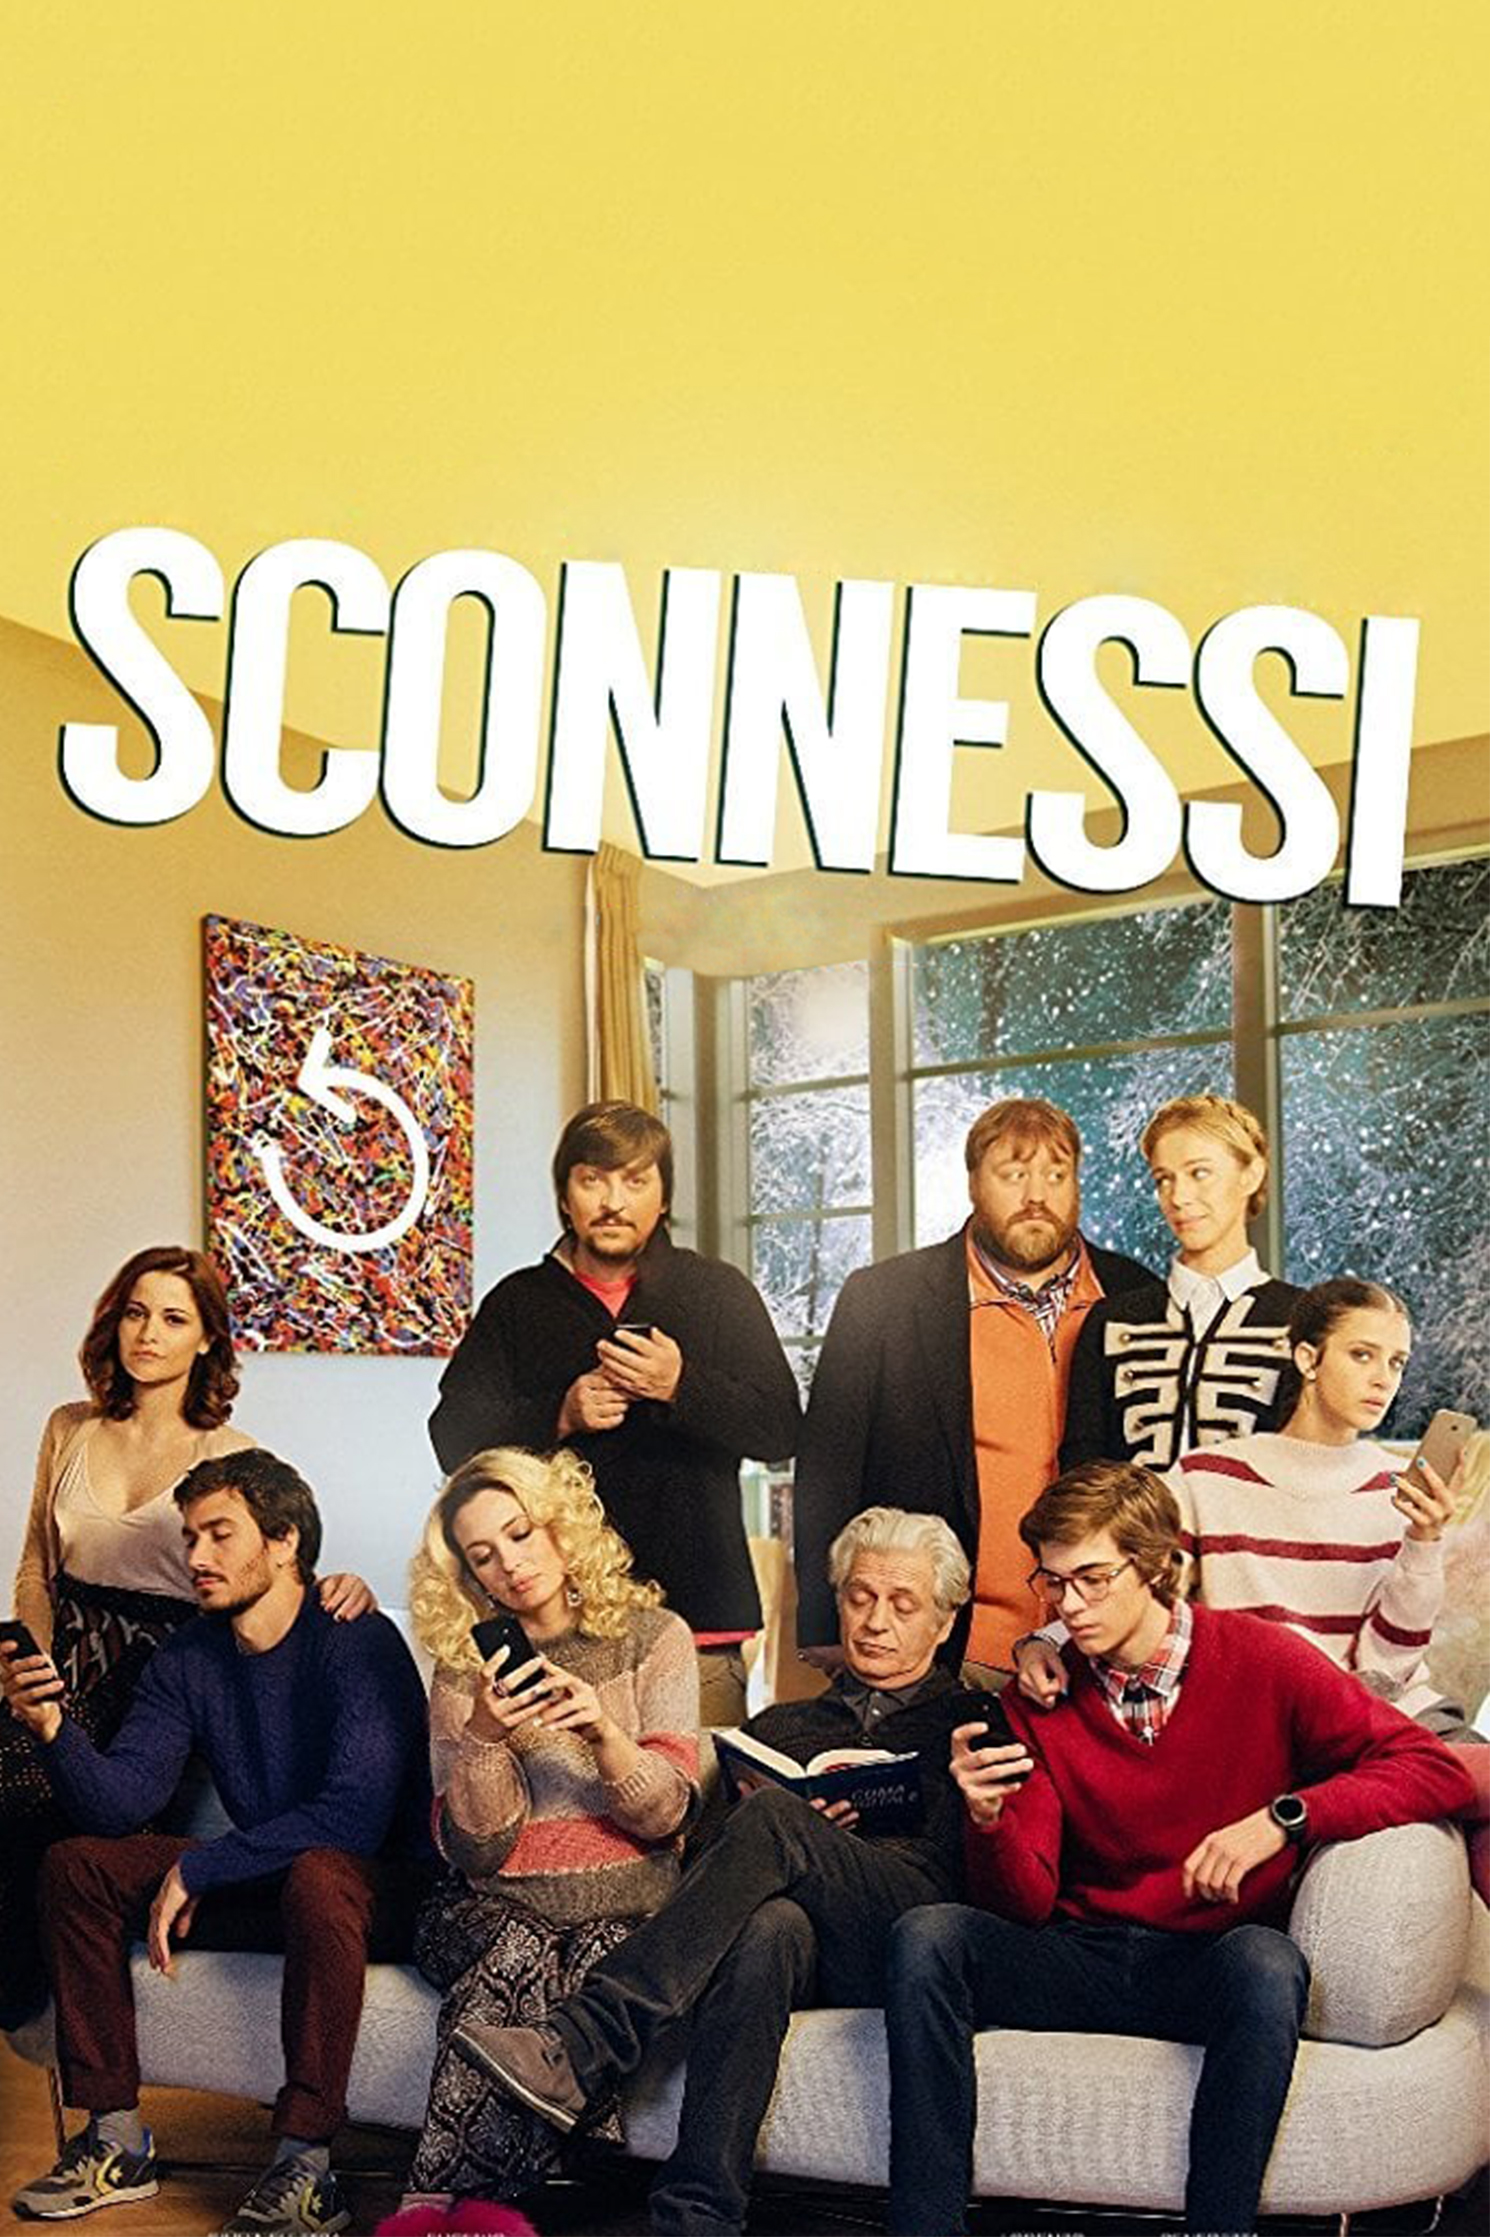 Sconnessi where to watch